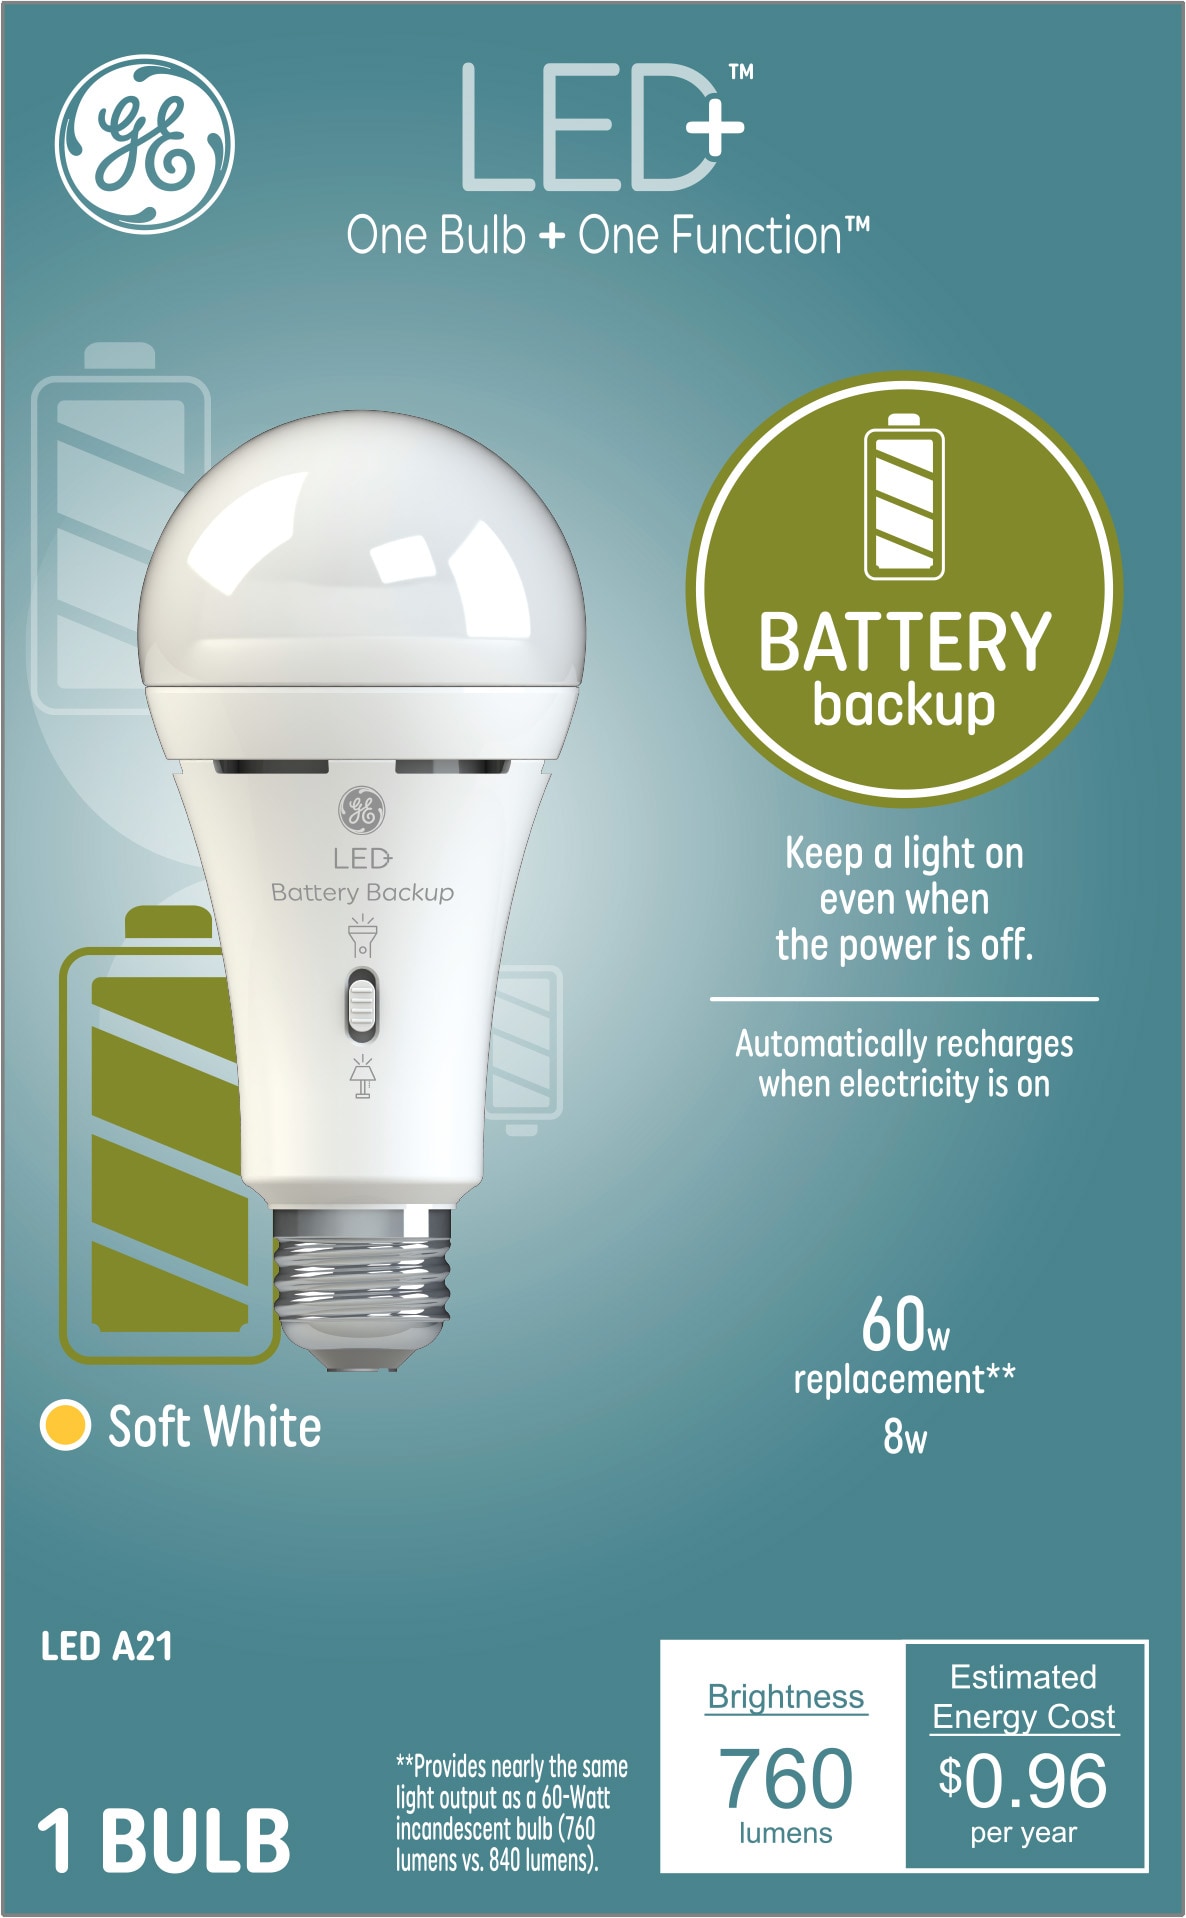 Safelumin LED Safety Light for Power Outages (Cool White - 5000K